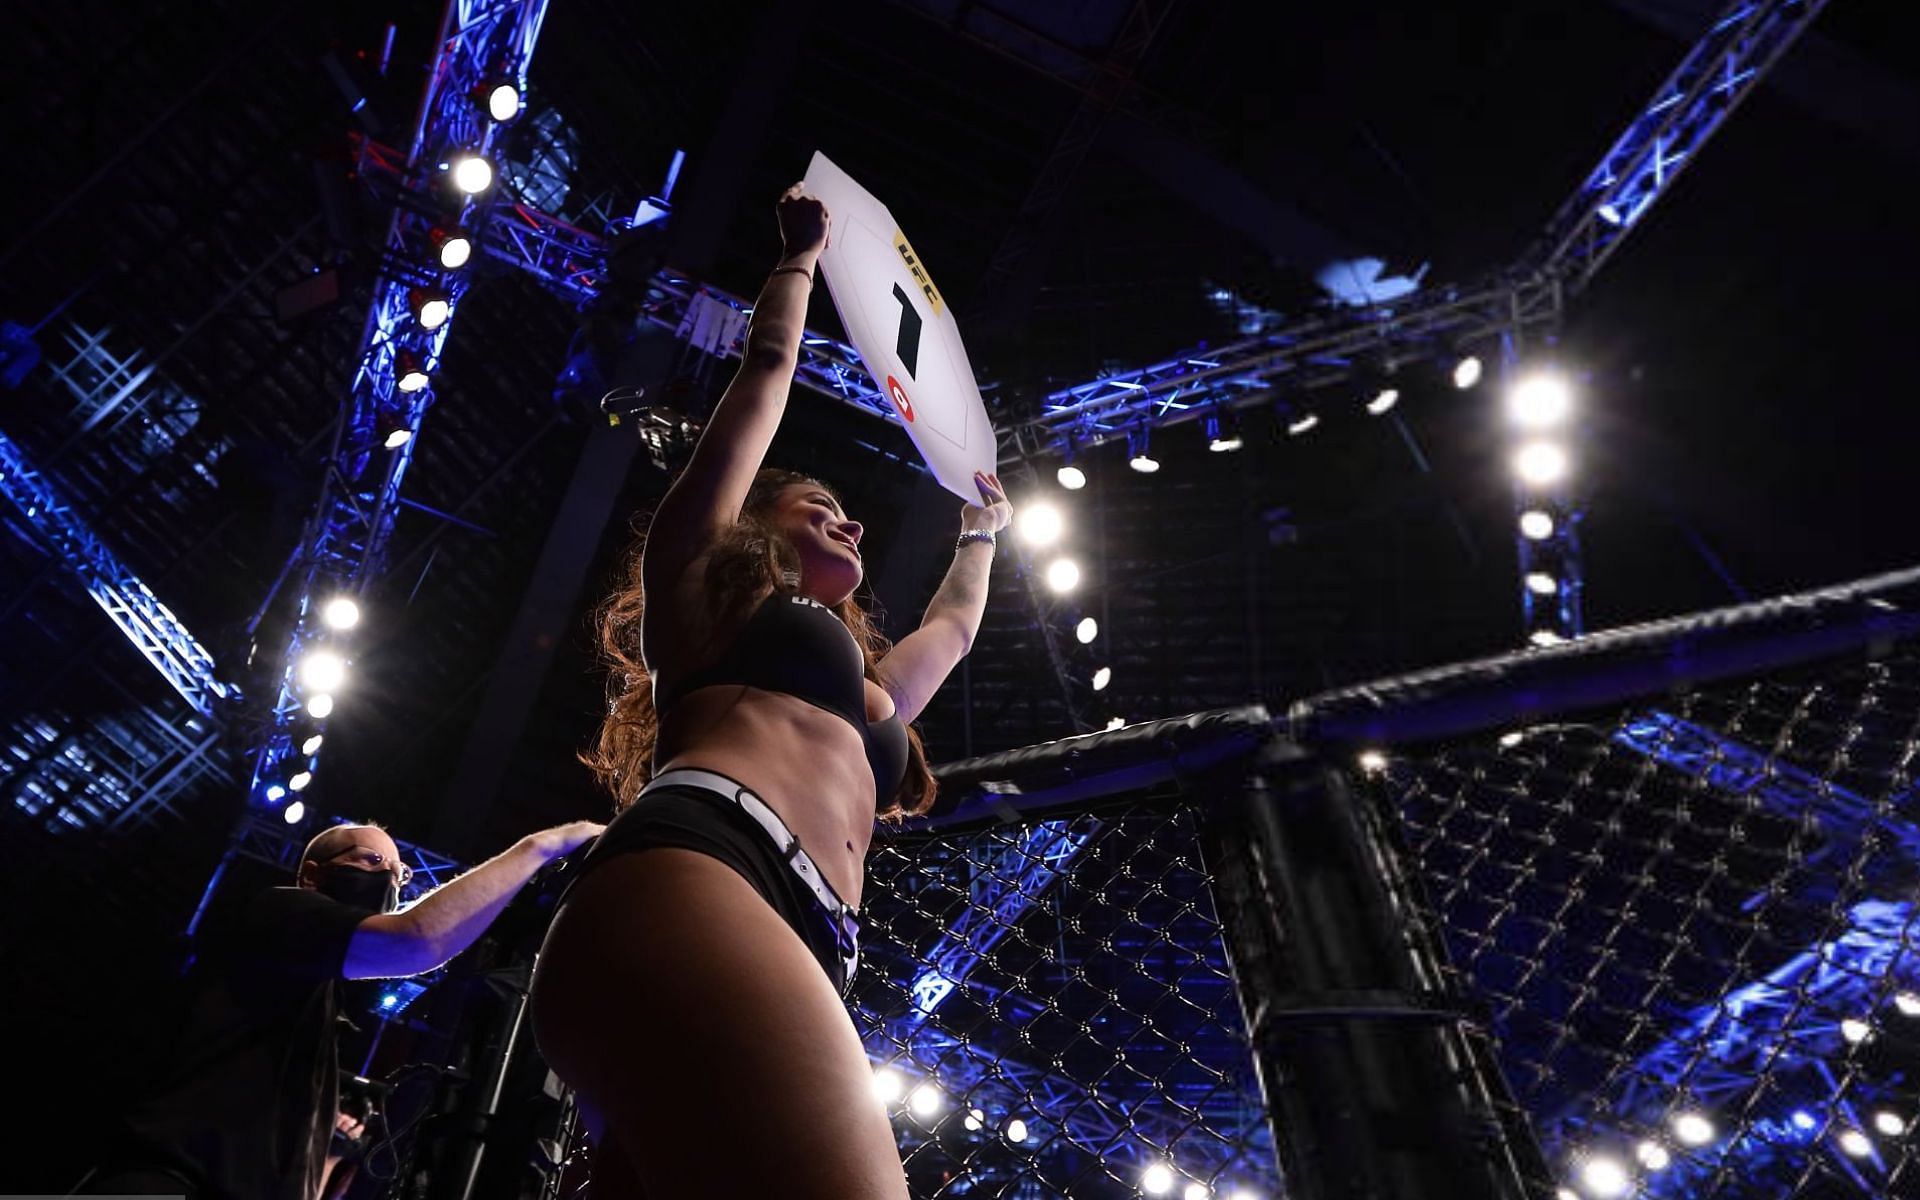 UFC ring girl at UFC 275 [Image Courtesy: @GettyImages]